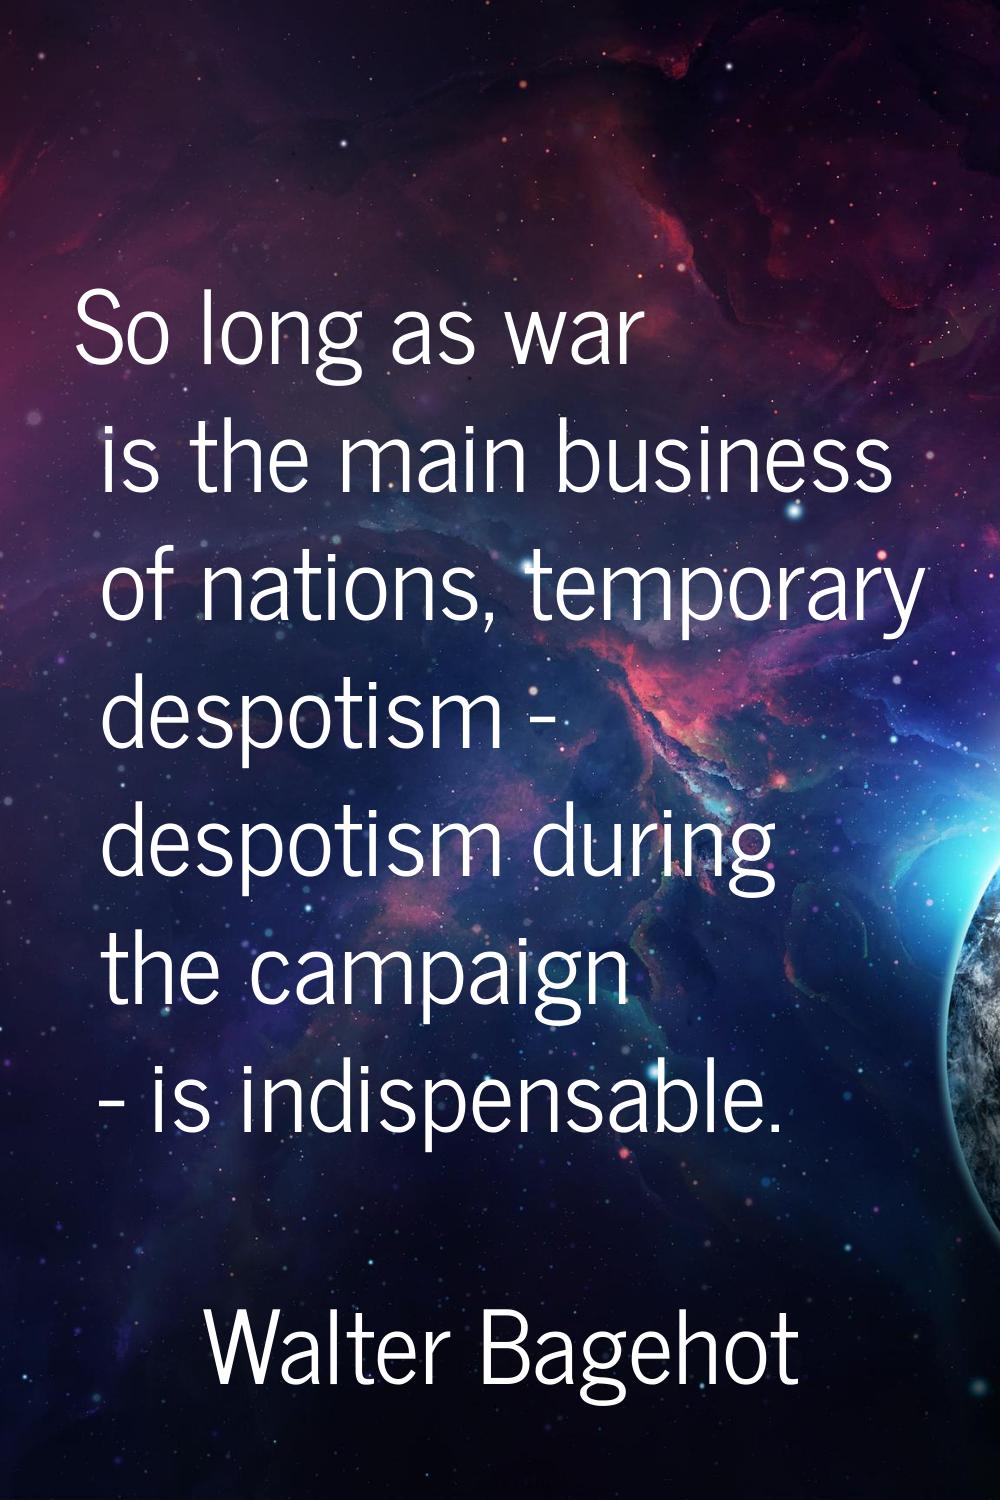 So long as war is the main business of nations, temporary despotism - despotism during the campaign